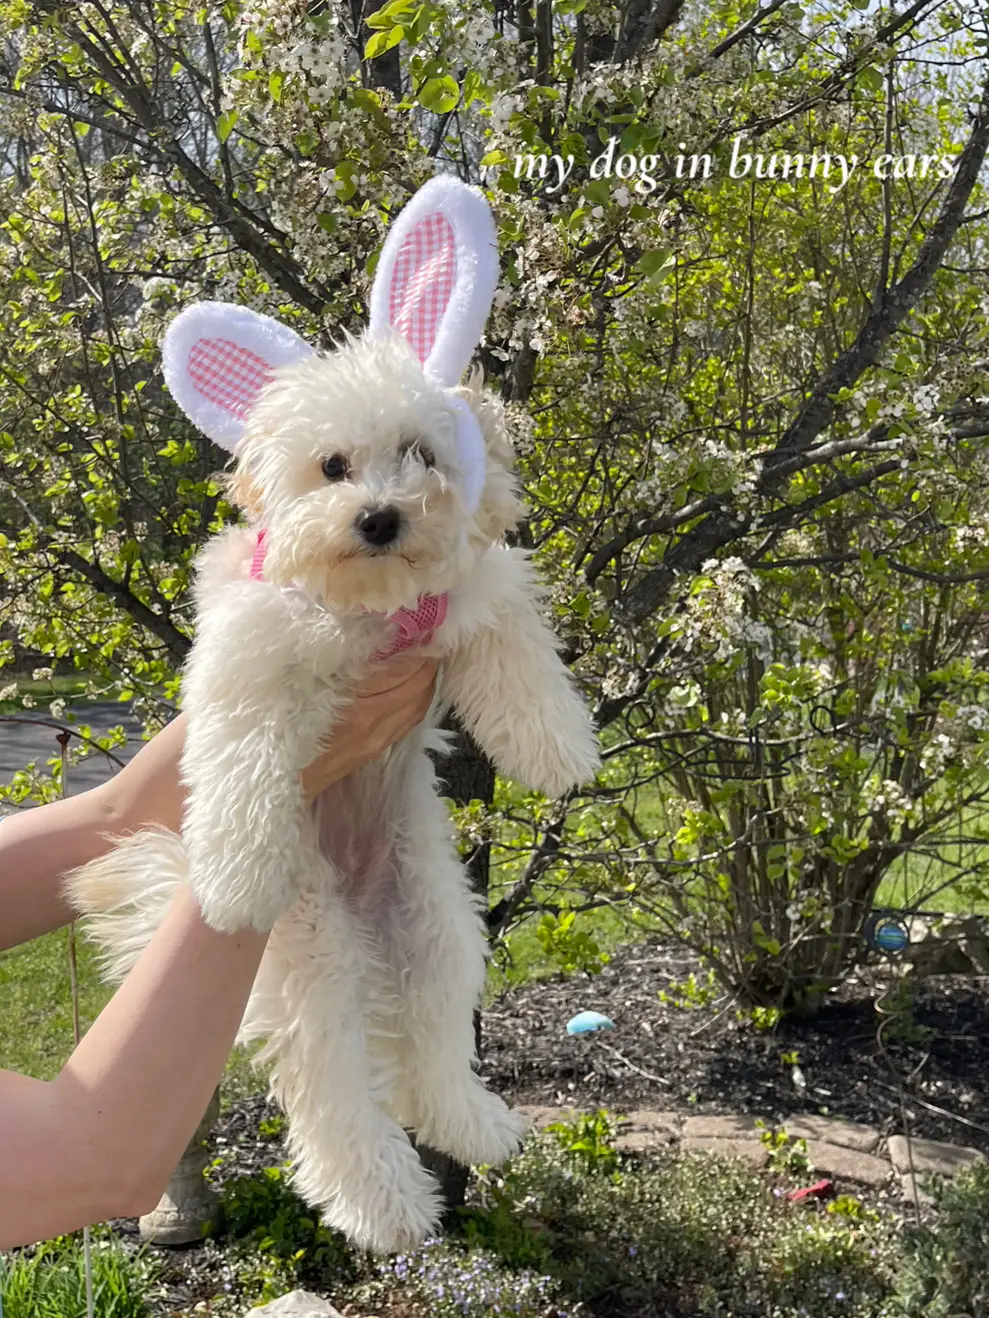  A person is holding a small dog in their hand. The dog is wearing bunny ears and is sitting on a person's arm.